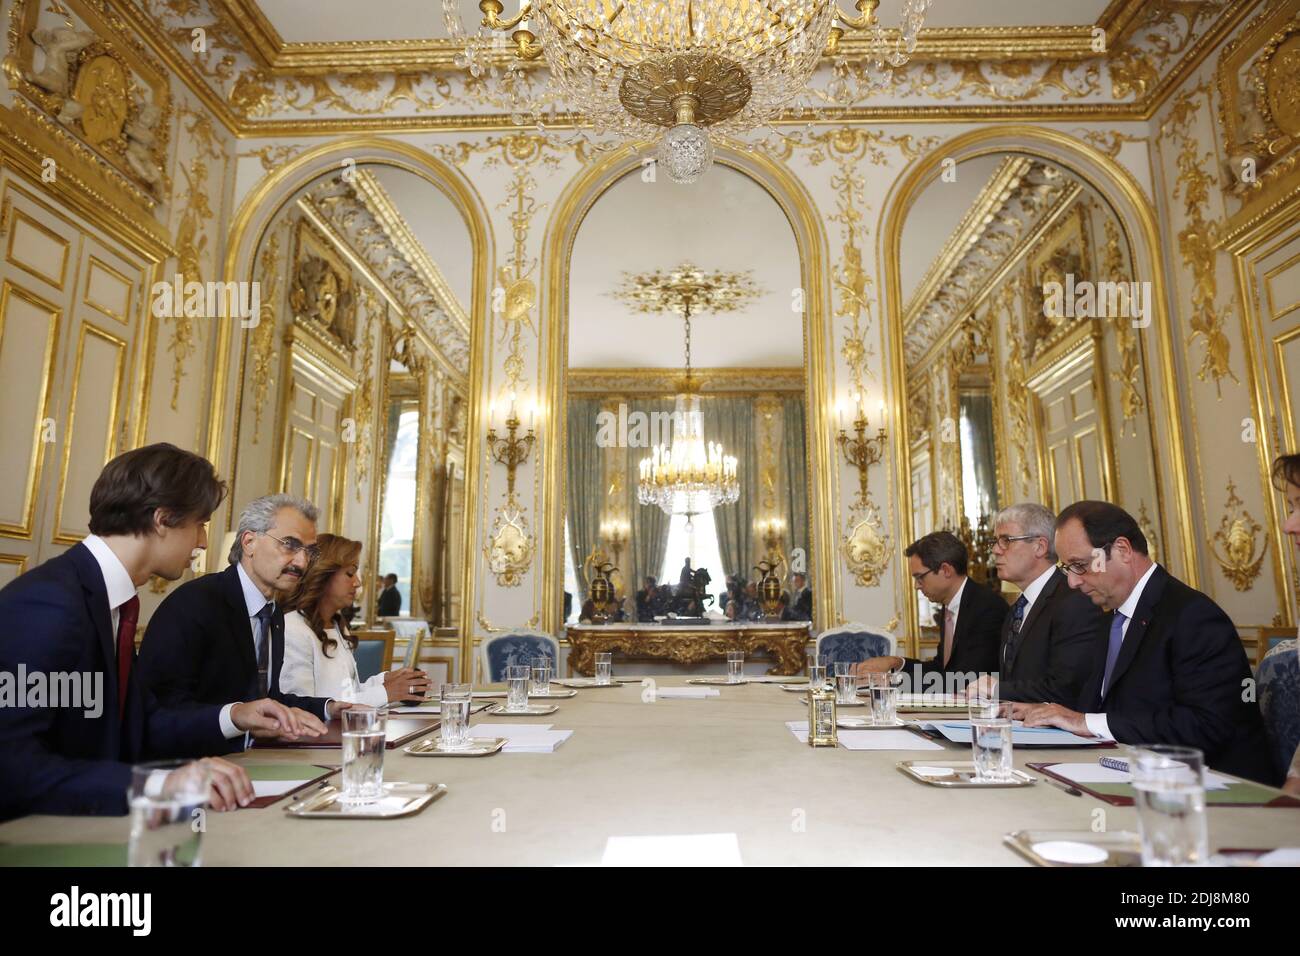 French President Francois Hollande receives Saudi business magnate, investor, and philanthropist Prince Al-Waleed Bin Talal bin Abdulaziz al Saud (Al-Walid ben Talal ben Abdelaziz Al Saoud) flanked by his Assisant Executive Manager for Travel and External Affairs Department Hassna Alturki for talks at the Elysee Palace in Paris, France on September 8, 2016. Photo by Denis Allard/Pool/ABACAPRESS.COM Stock Photo